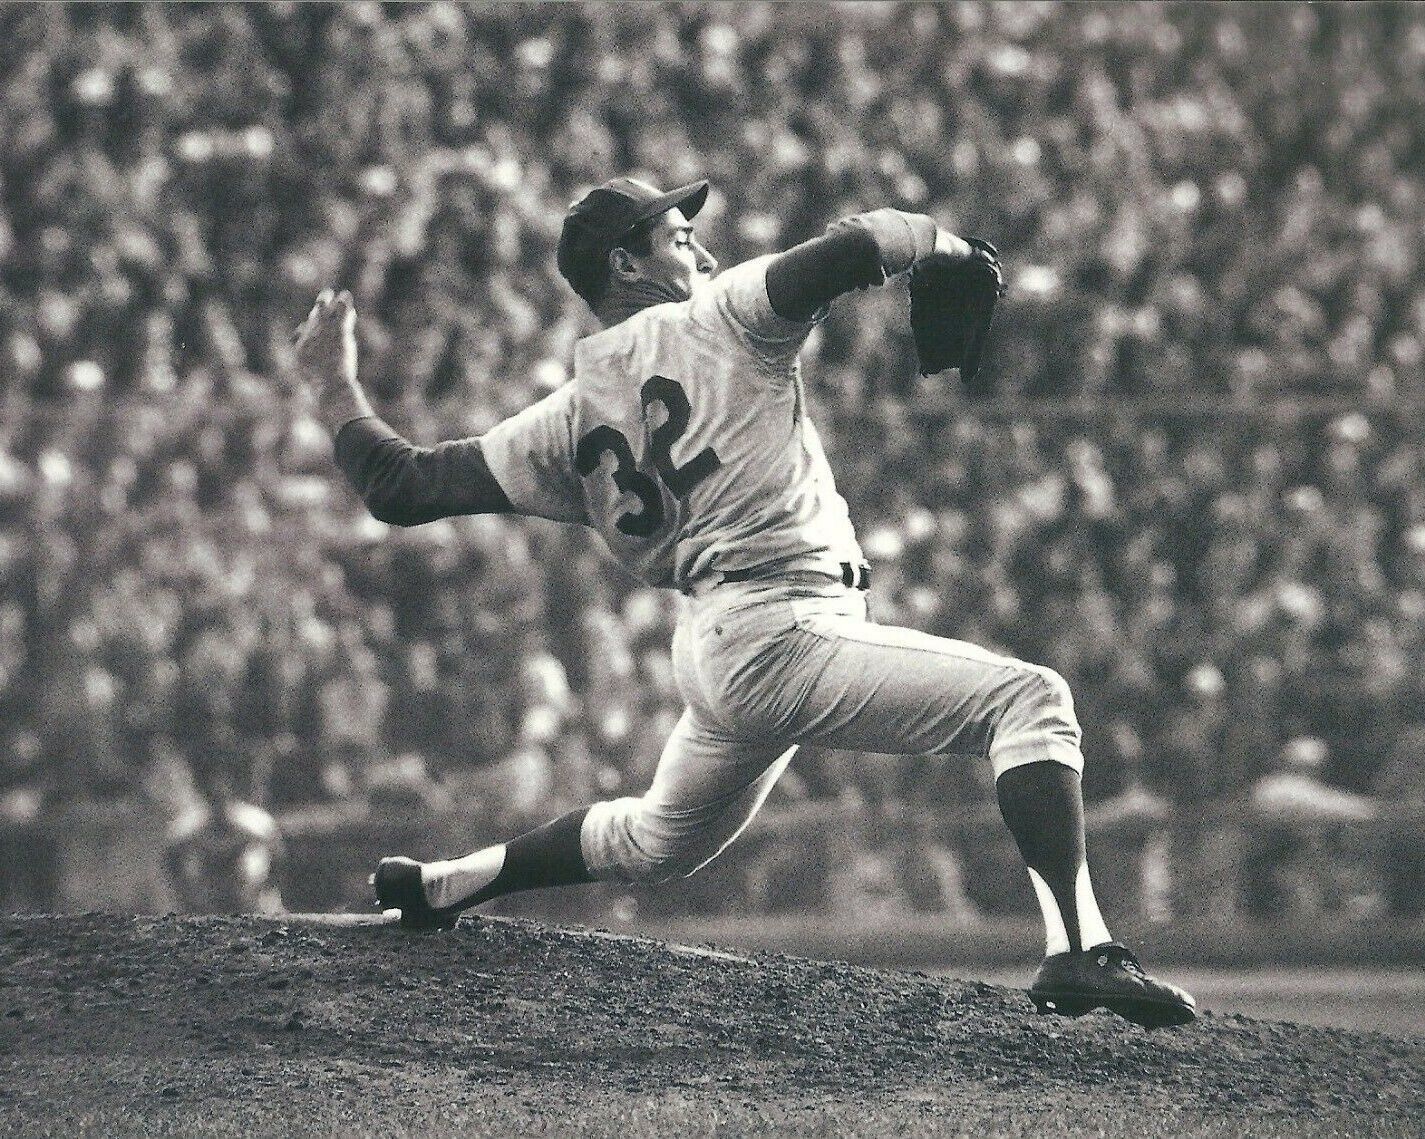 Primary image for SANDY KOUFAX 8X10 PHOTO LOS ANGELES DODGERS MLB BASEBALL PICTURE B/W GAME ACTION